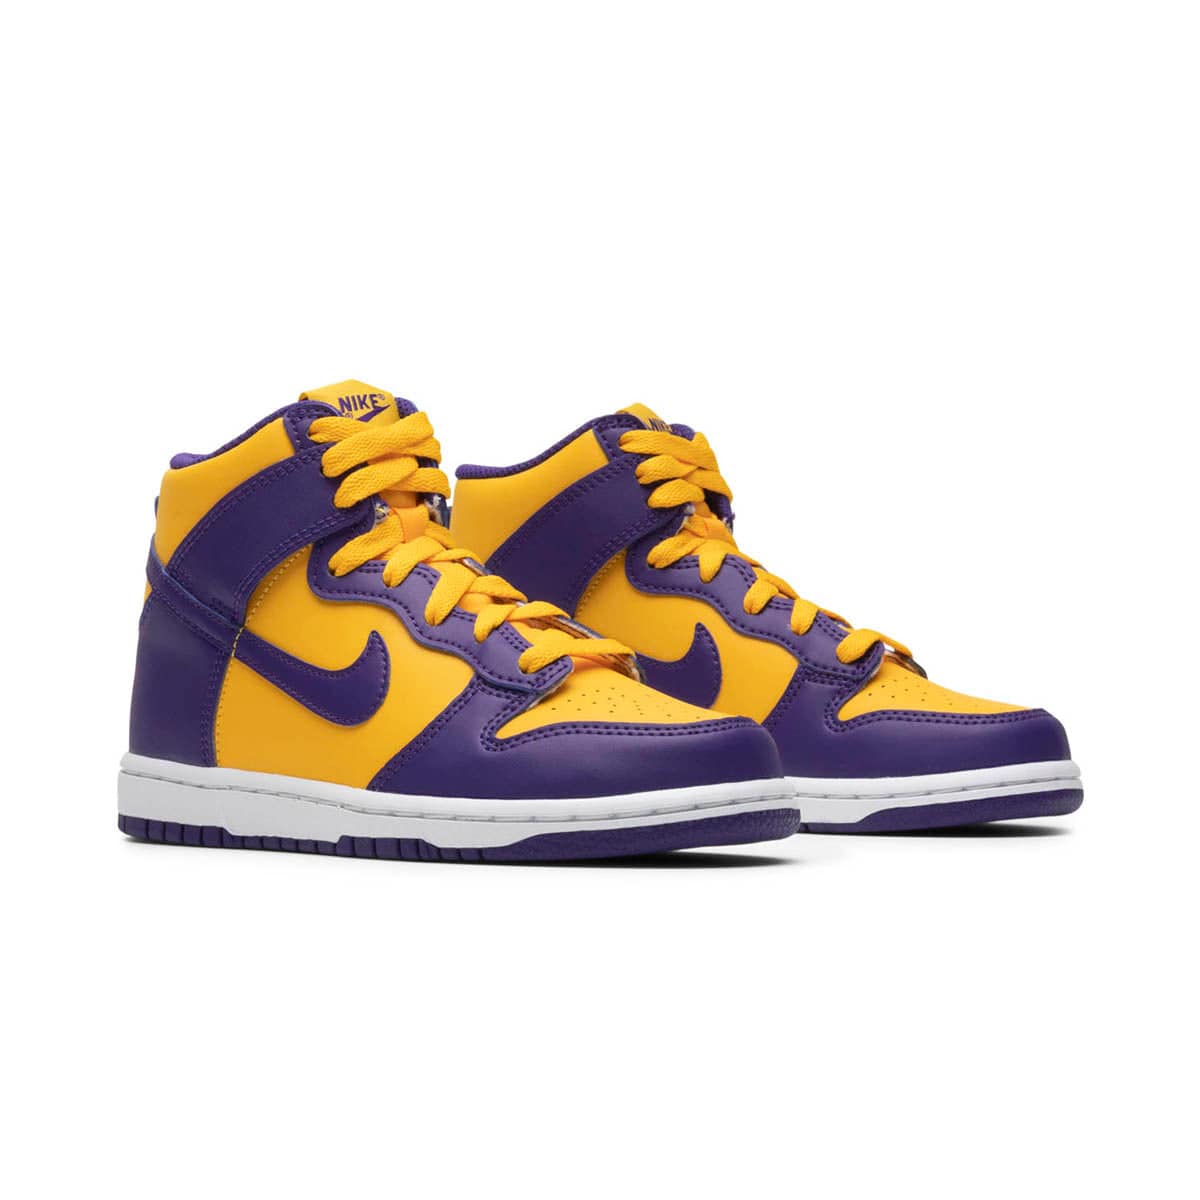 Nike Youth DUNK HIGH LAKERS PS